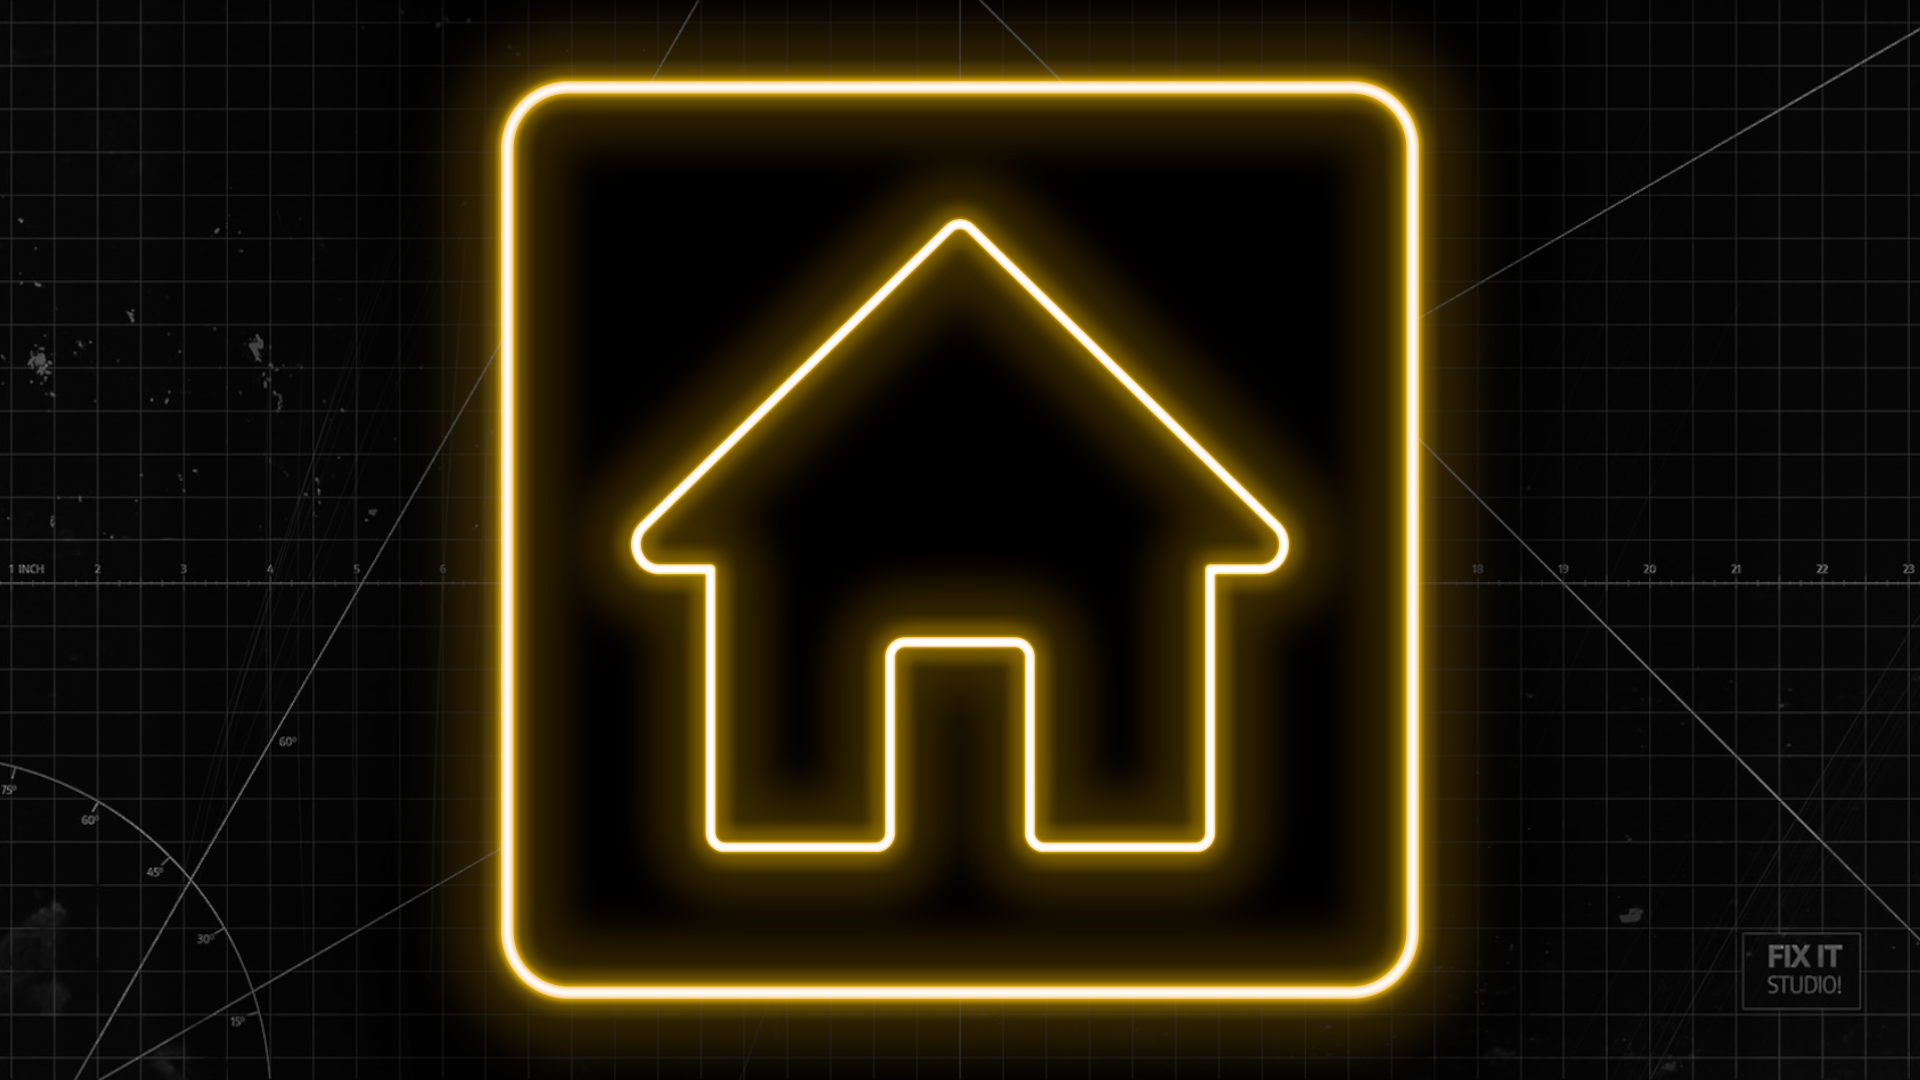 Icon for Home sweet home